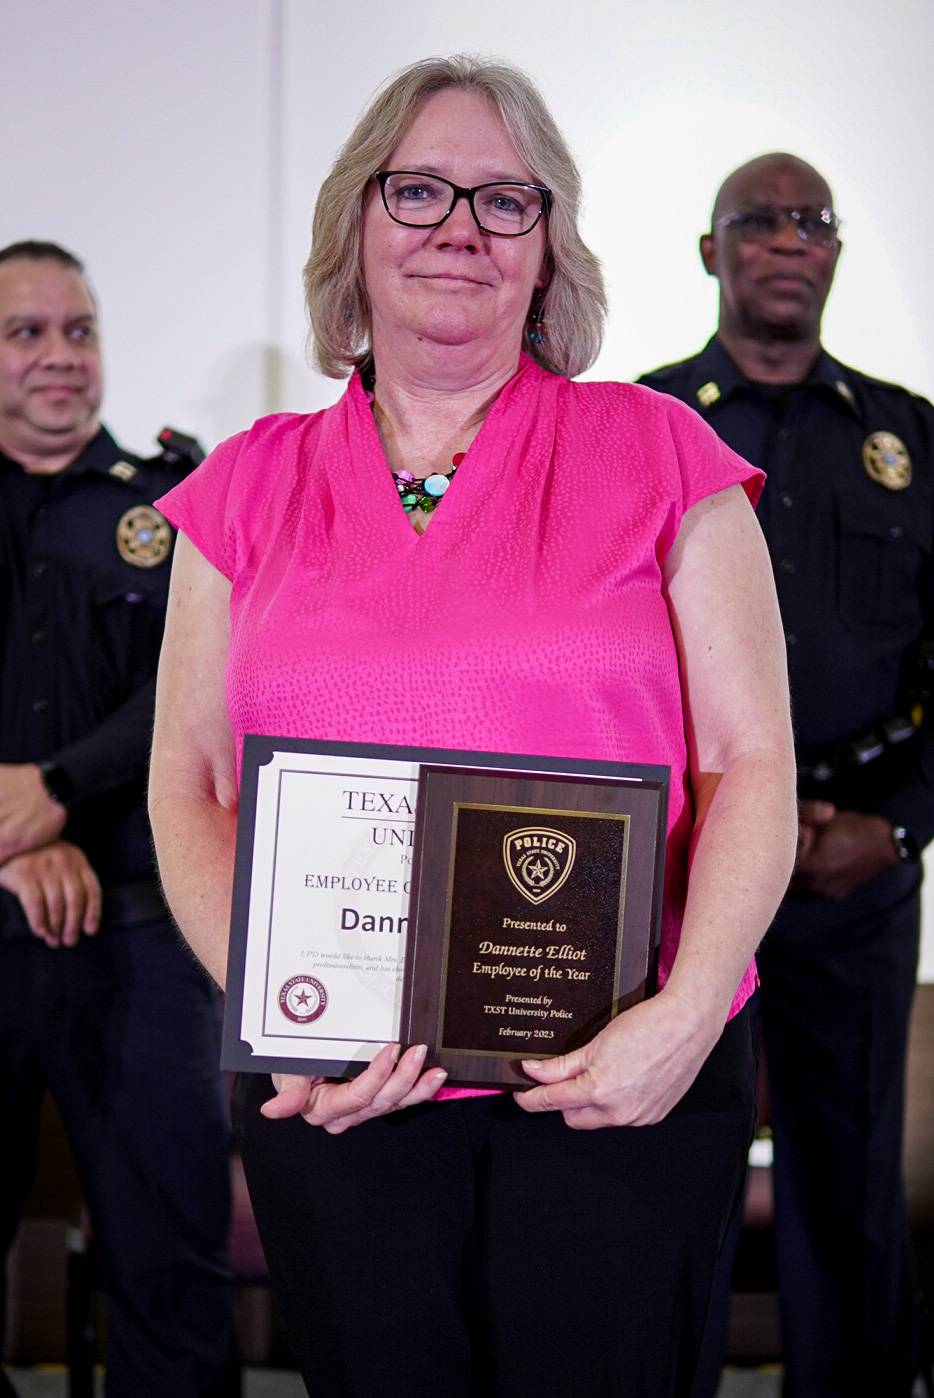 woman in pink shirt smiling with awards